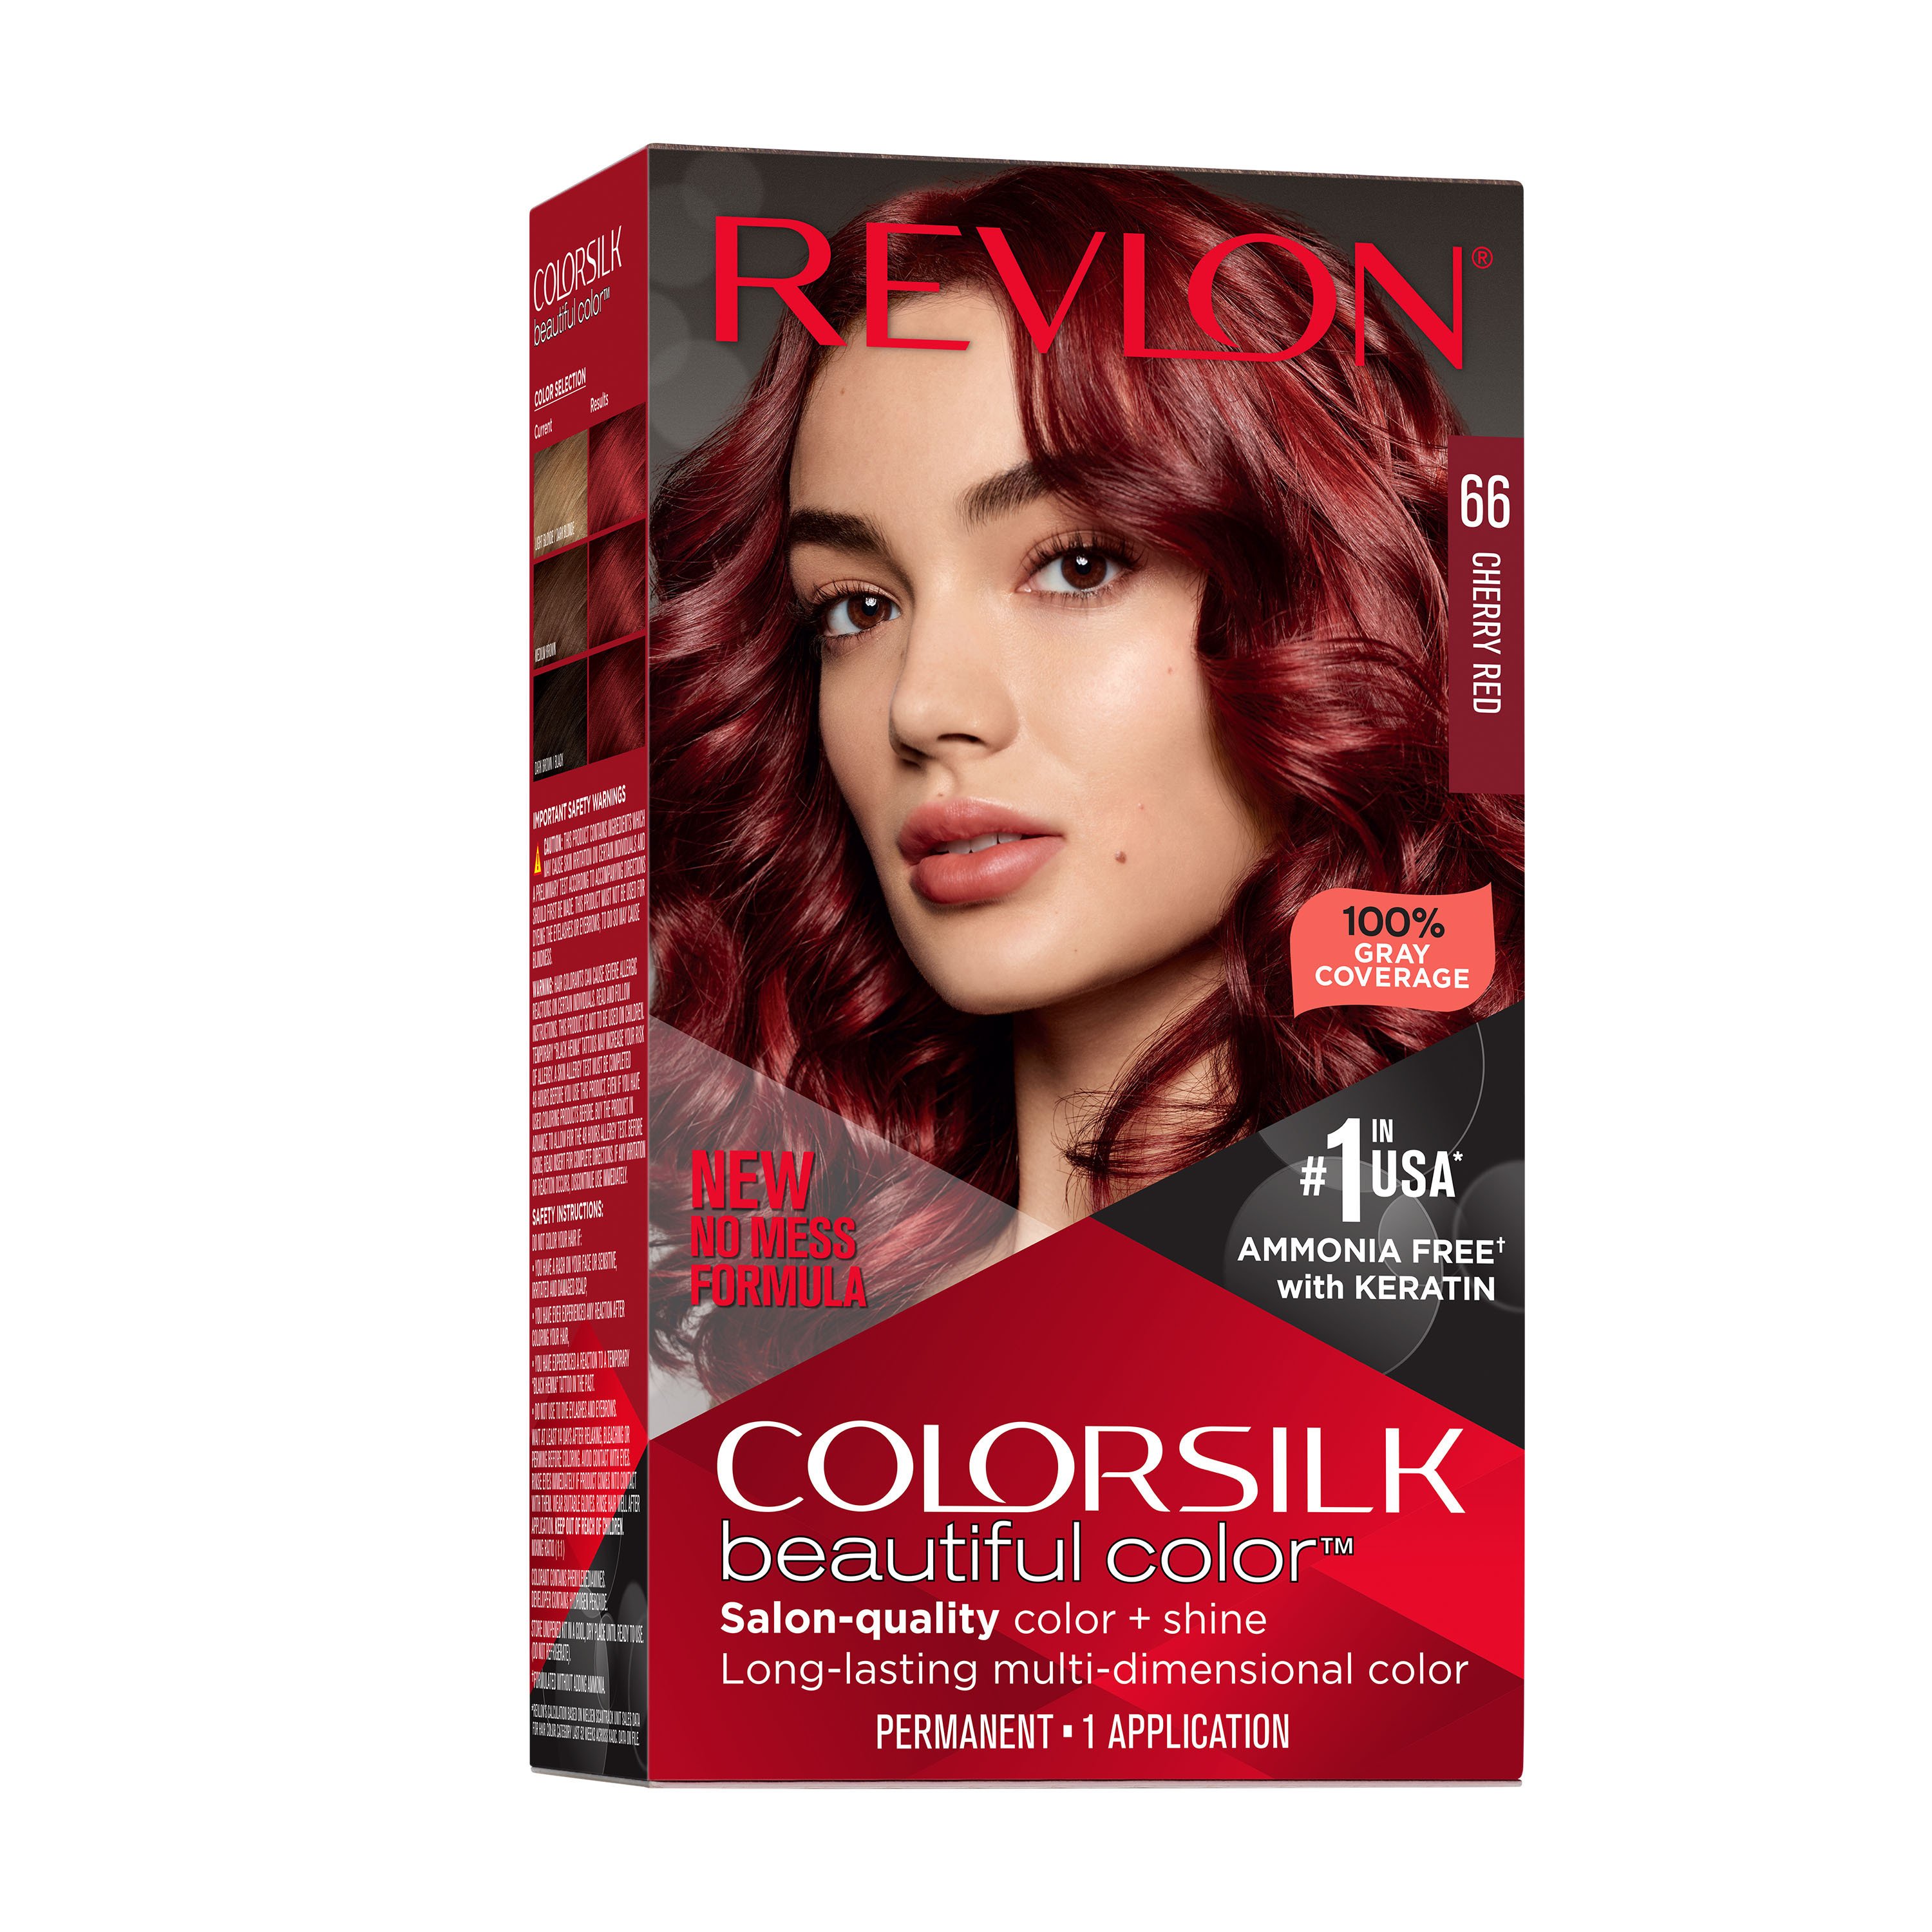 bright cherry red hair color